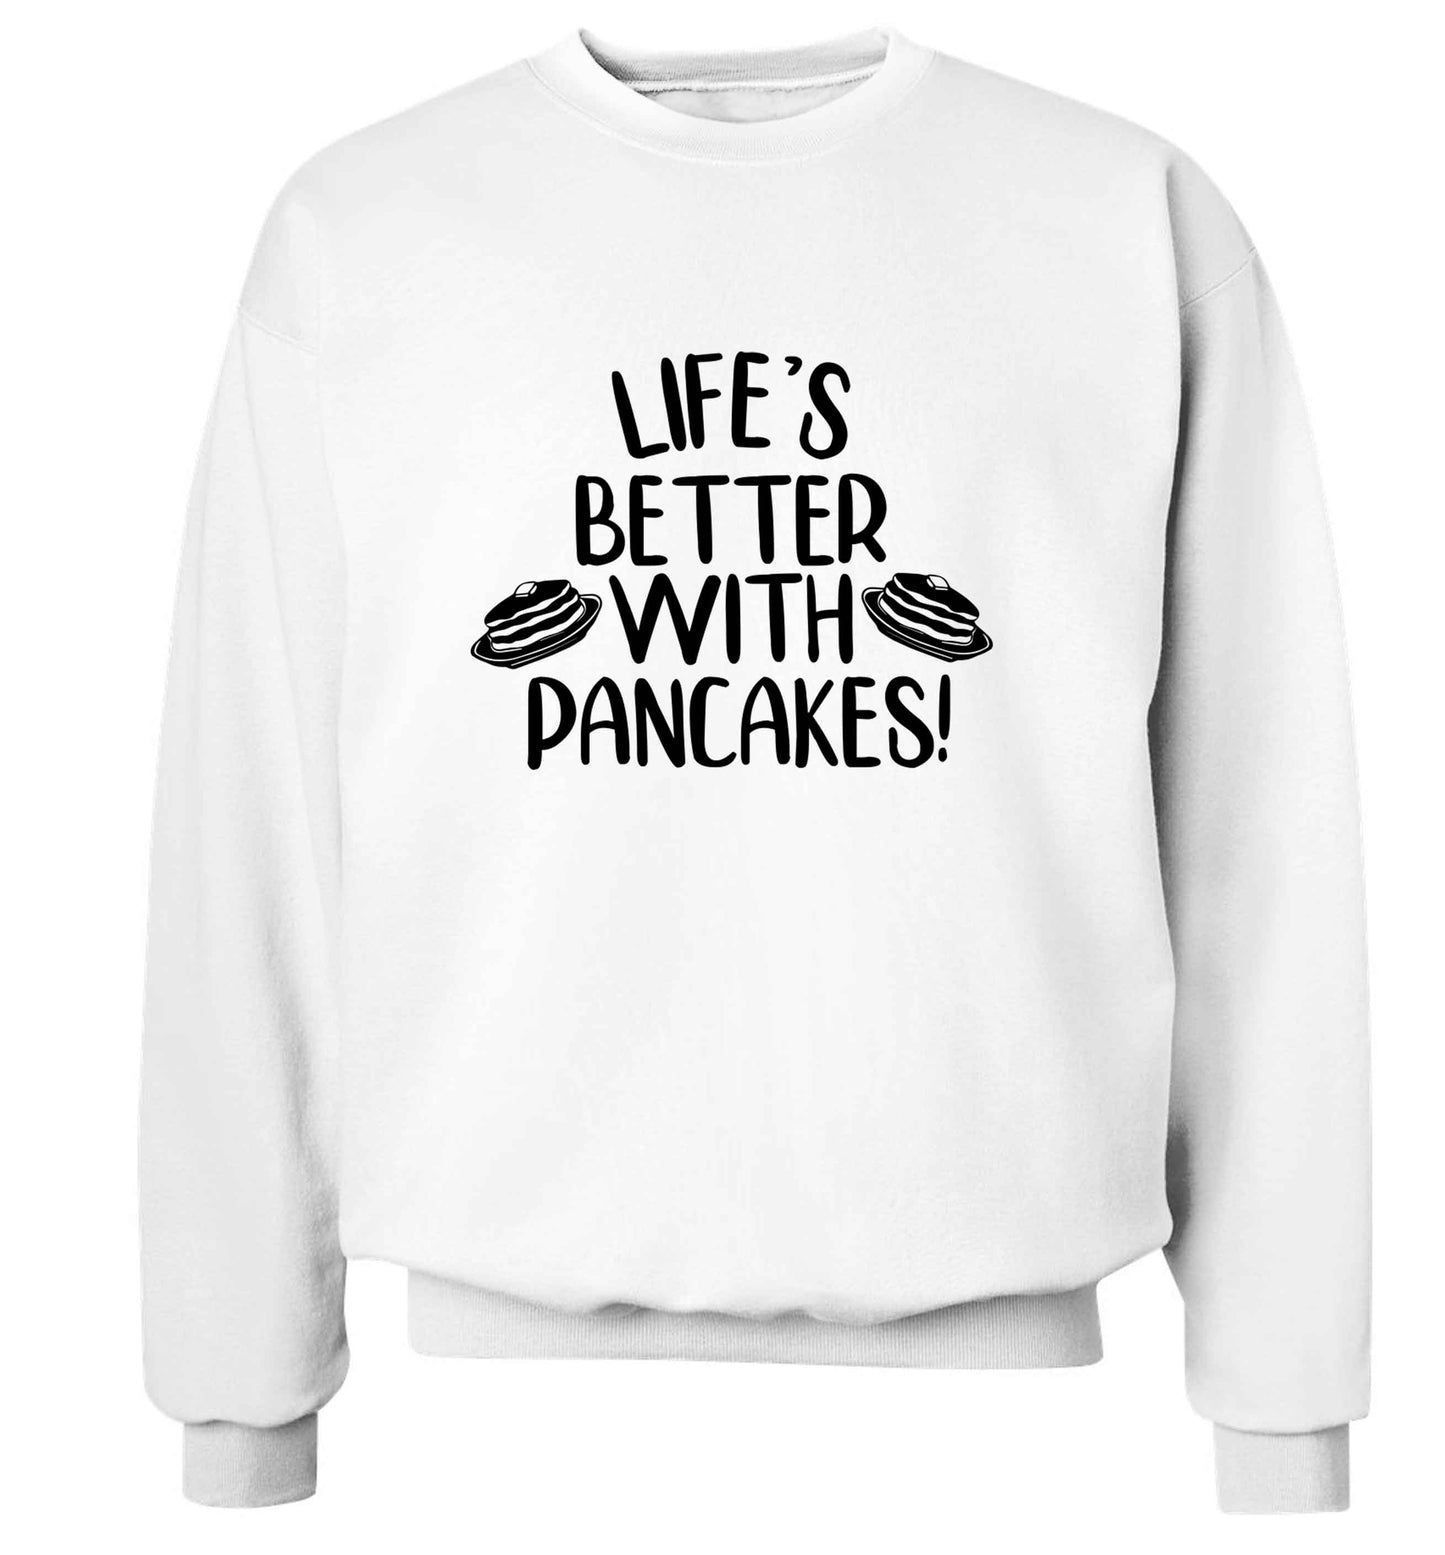 Life's better with pancakes adult's unisex white sweater 2XL